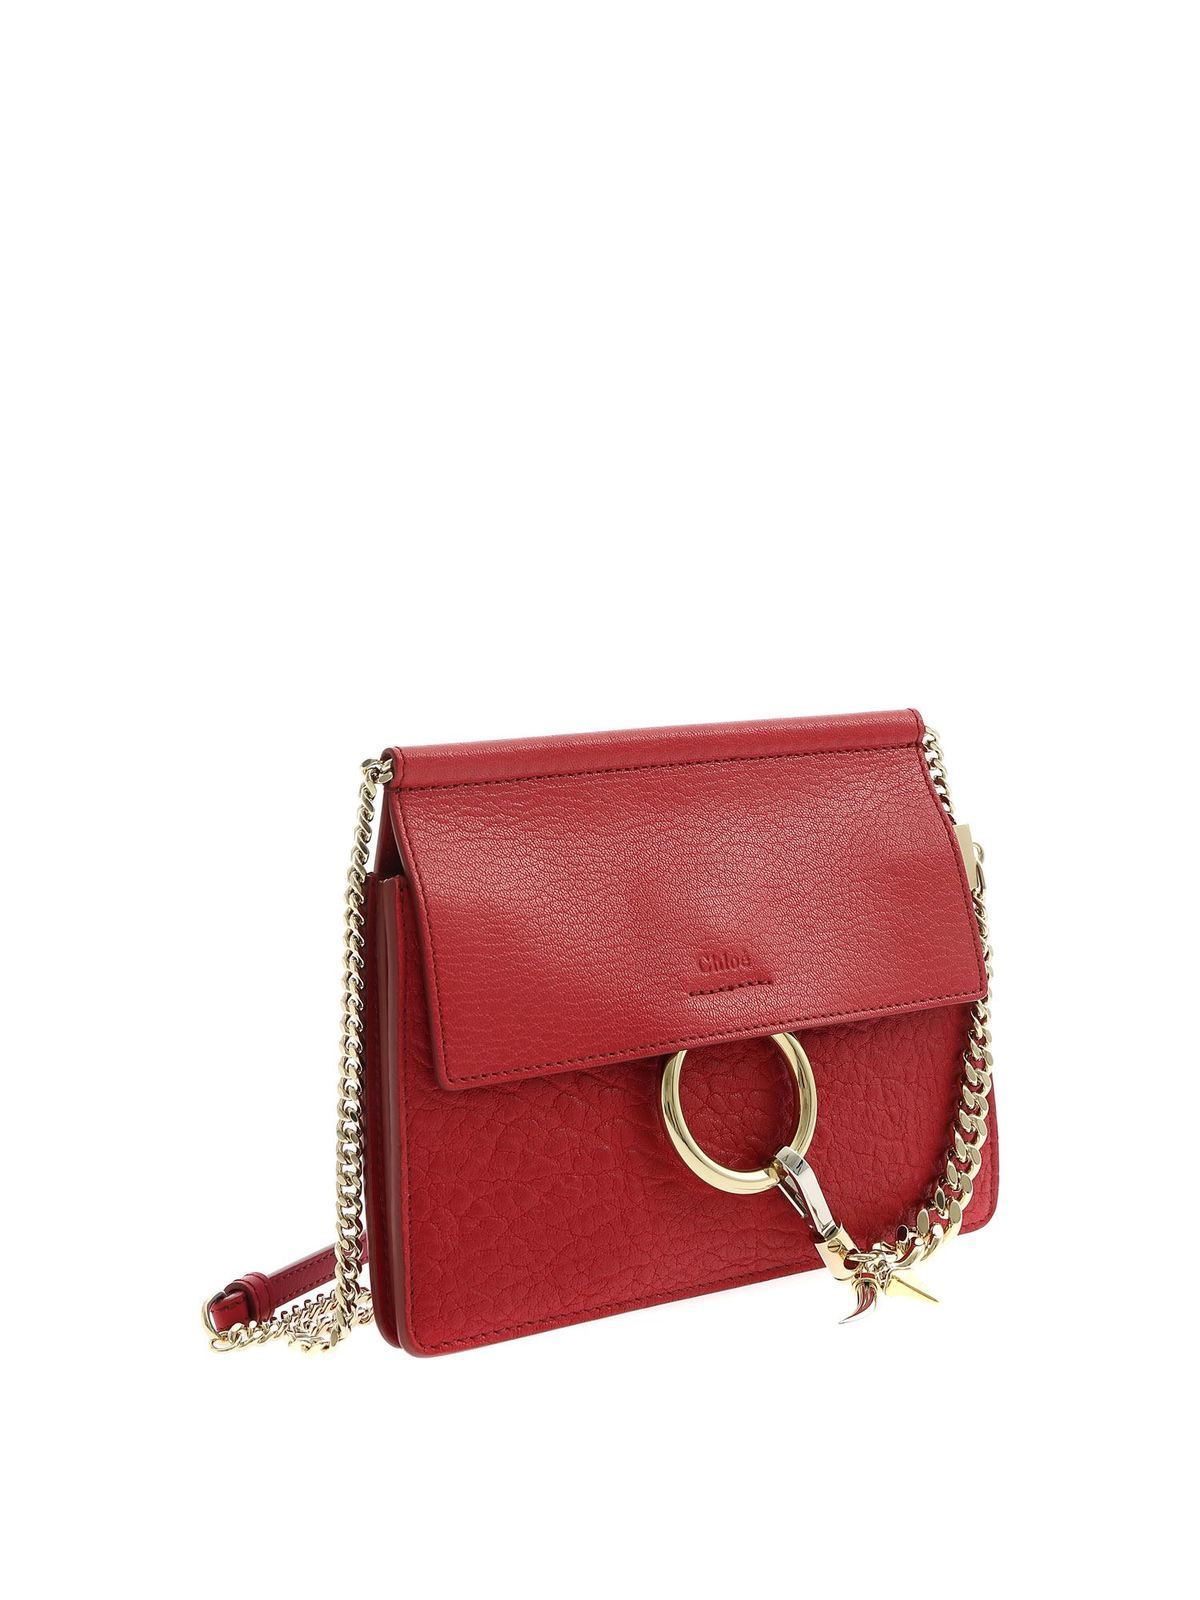 Marquee Mastery Antage Cross body bags Chloe' - Faye mini red bag with charms - CHC20SS202C27634